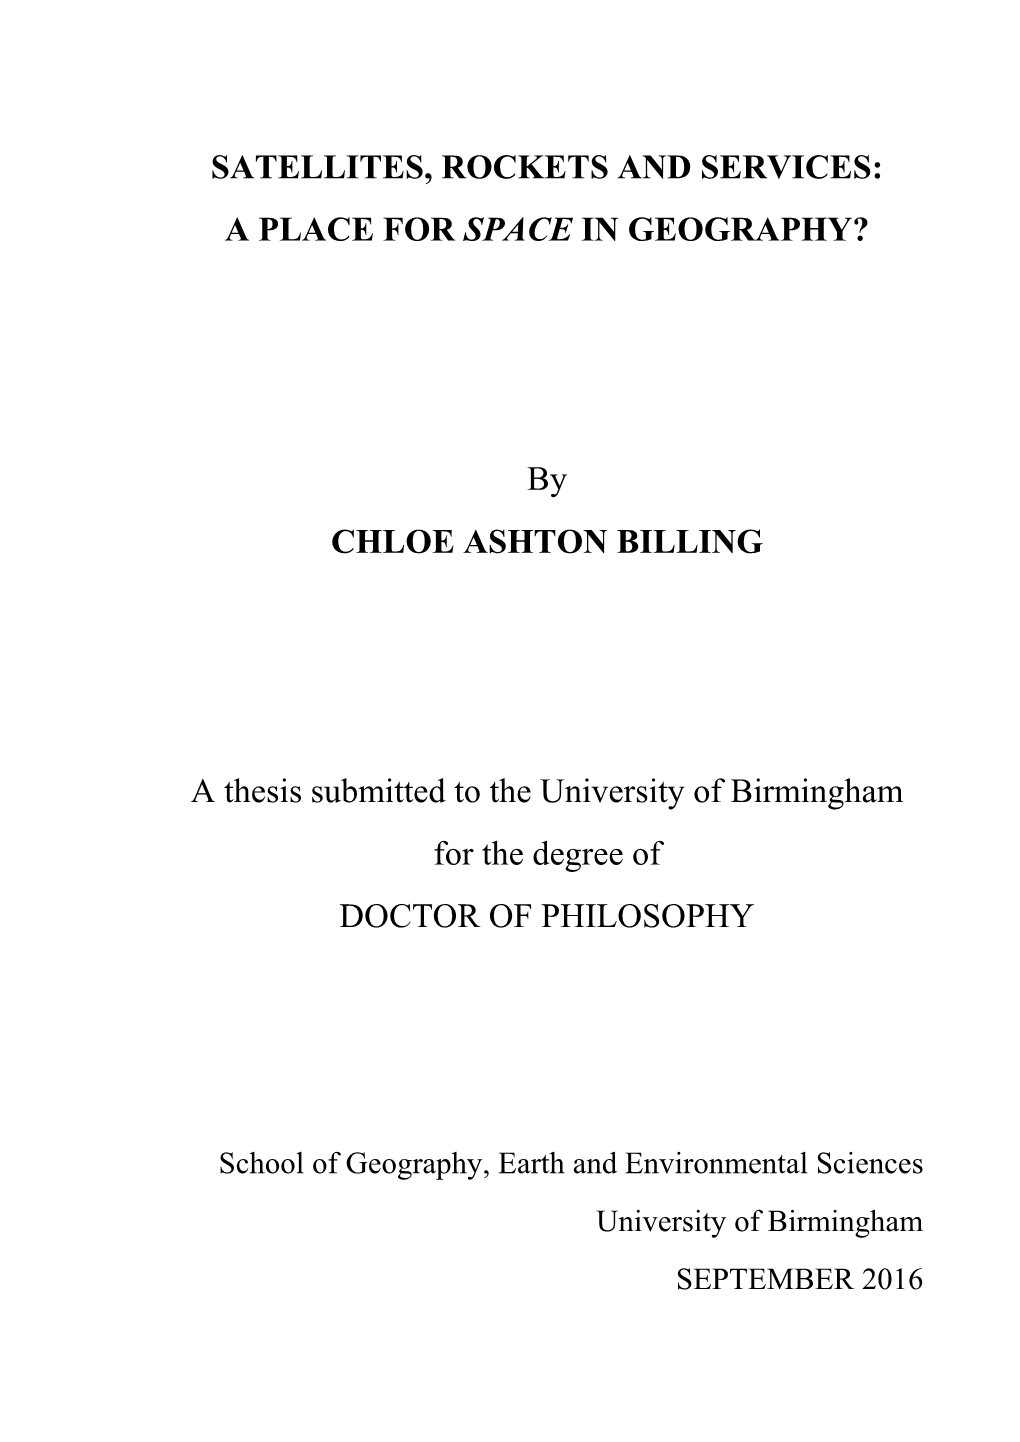 A Place for Space in Geography?